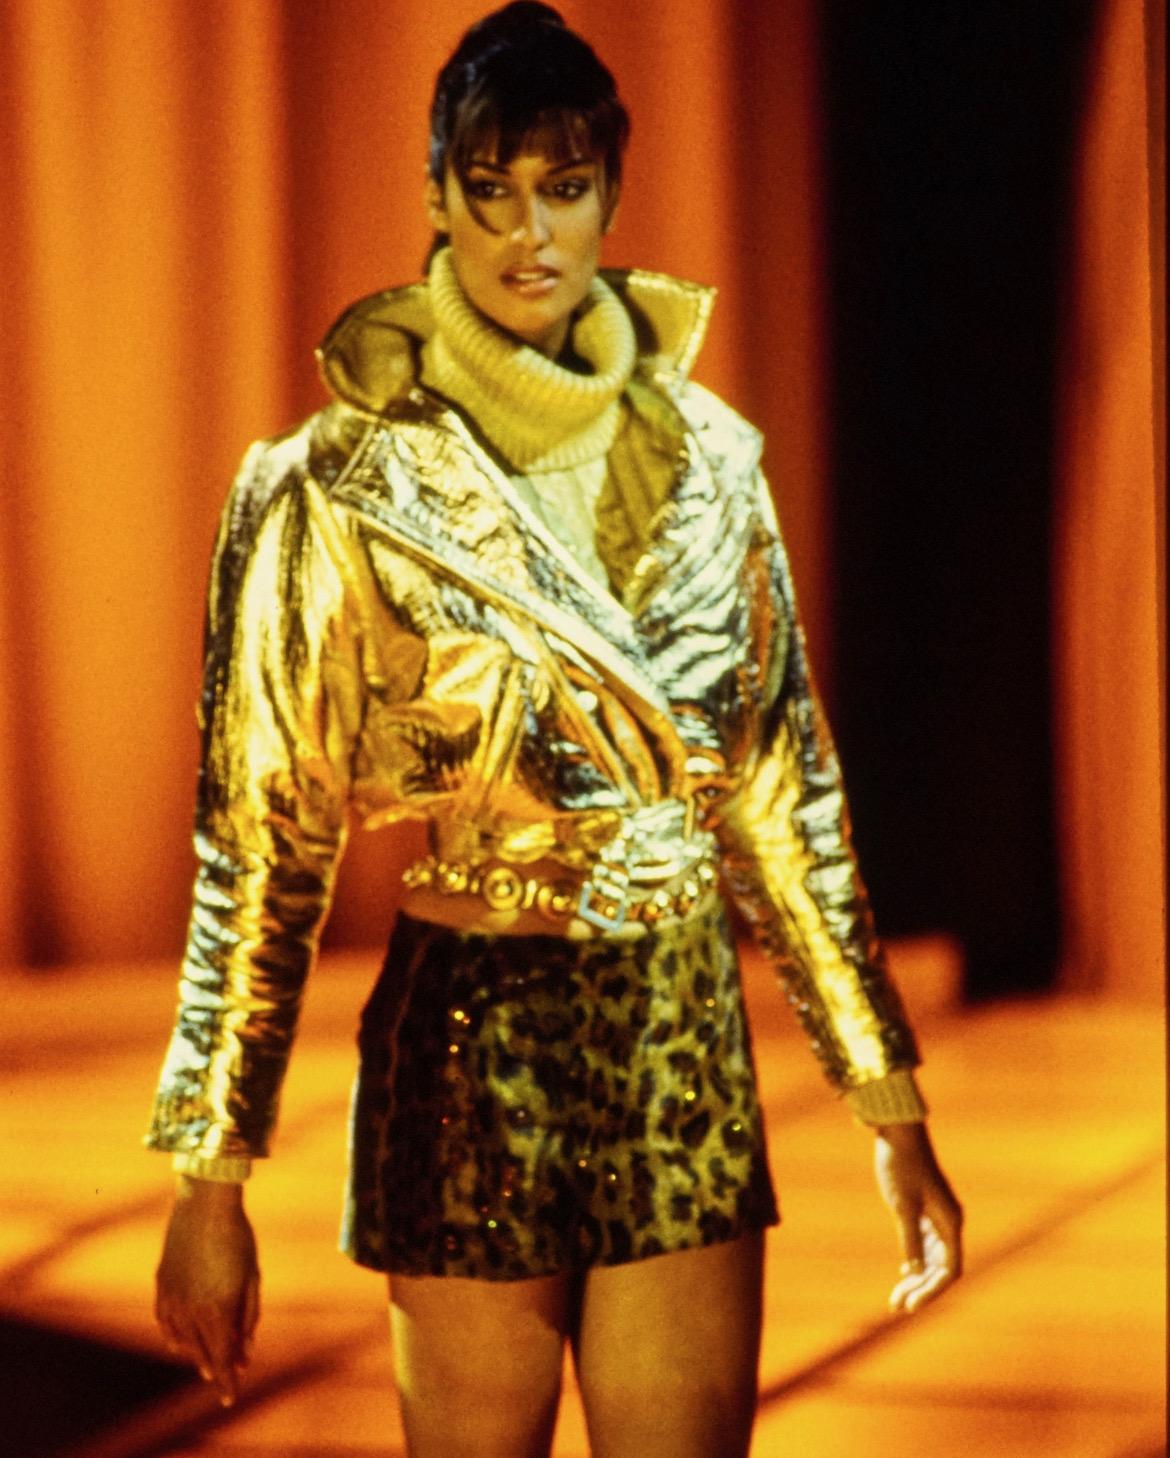 TheRealList presents: an incredible gold-colored Gianni Versace turtleneck sweater, designed by Gianni Versace. From the Fall/Winter 1994 collection, this sweater debuted on the season's runway as part of look 71 modeled by Yasmeen Ghauri. Similar